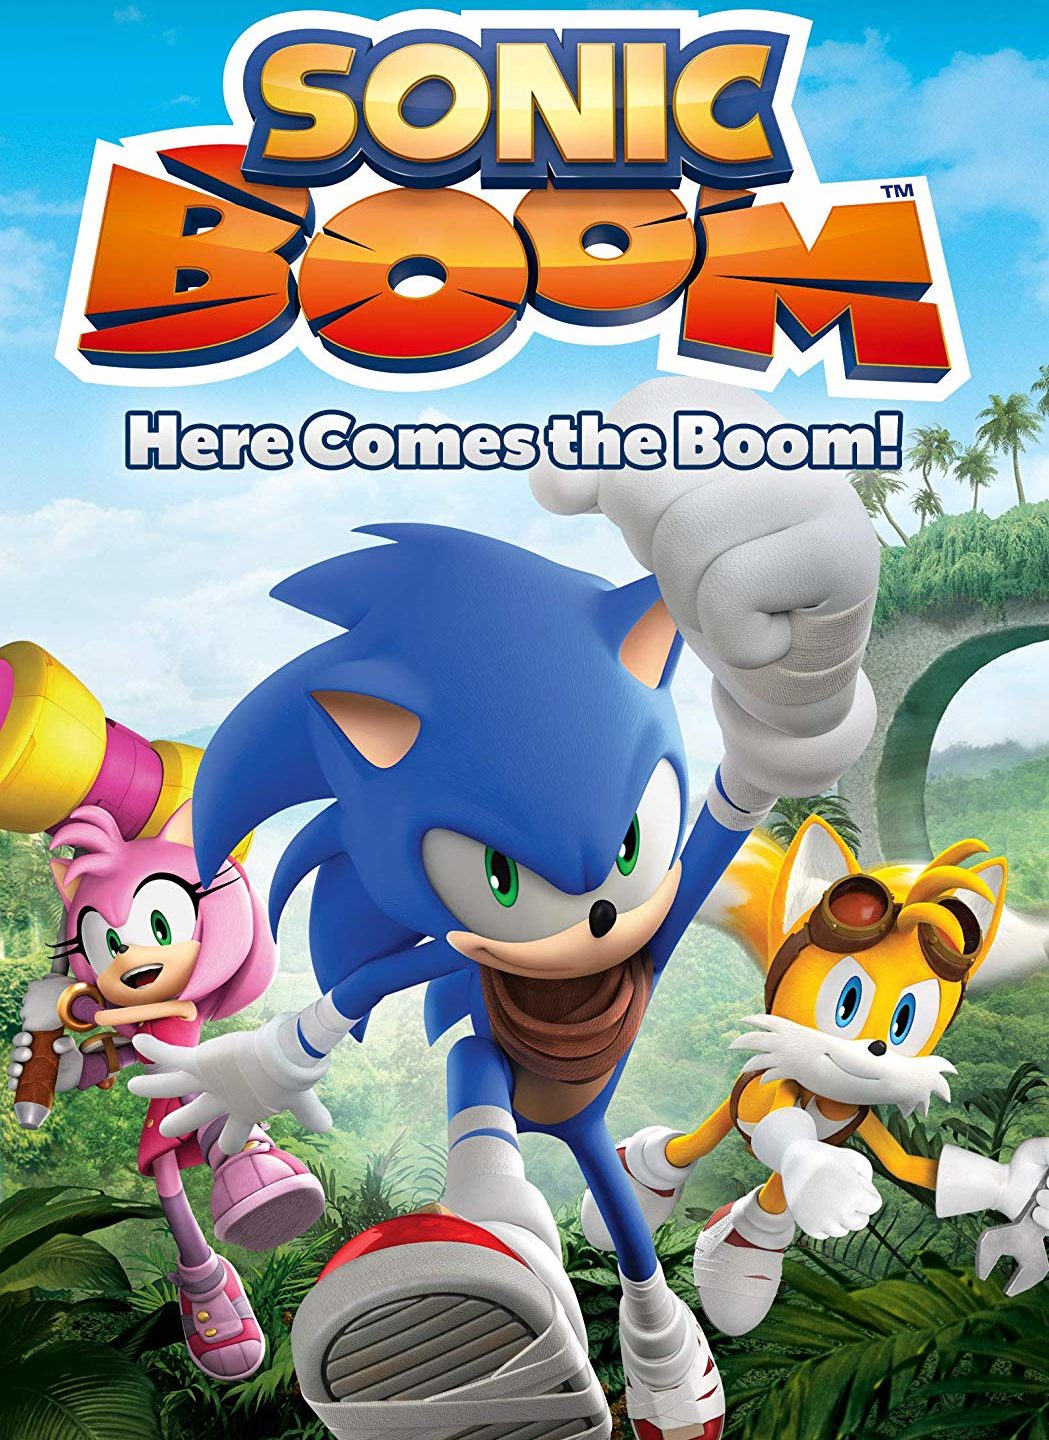 Sonic Boom: Here Comes the Boom! – Educational and Amusing. Great Characters!